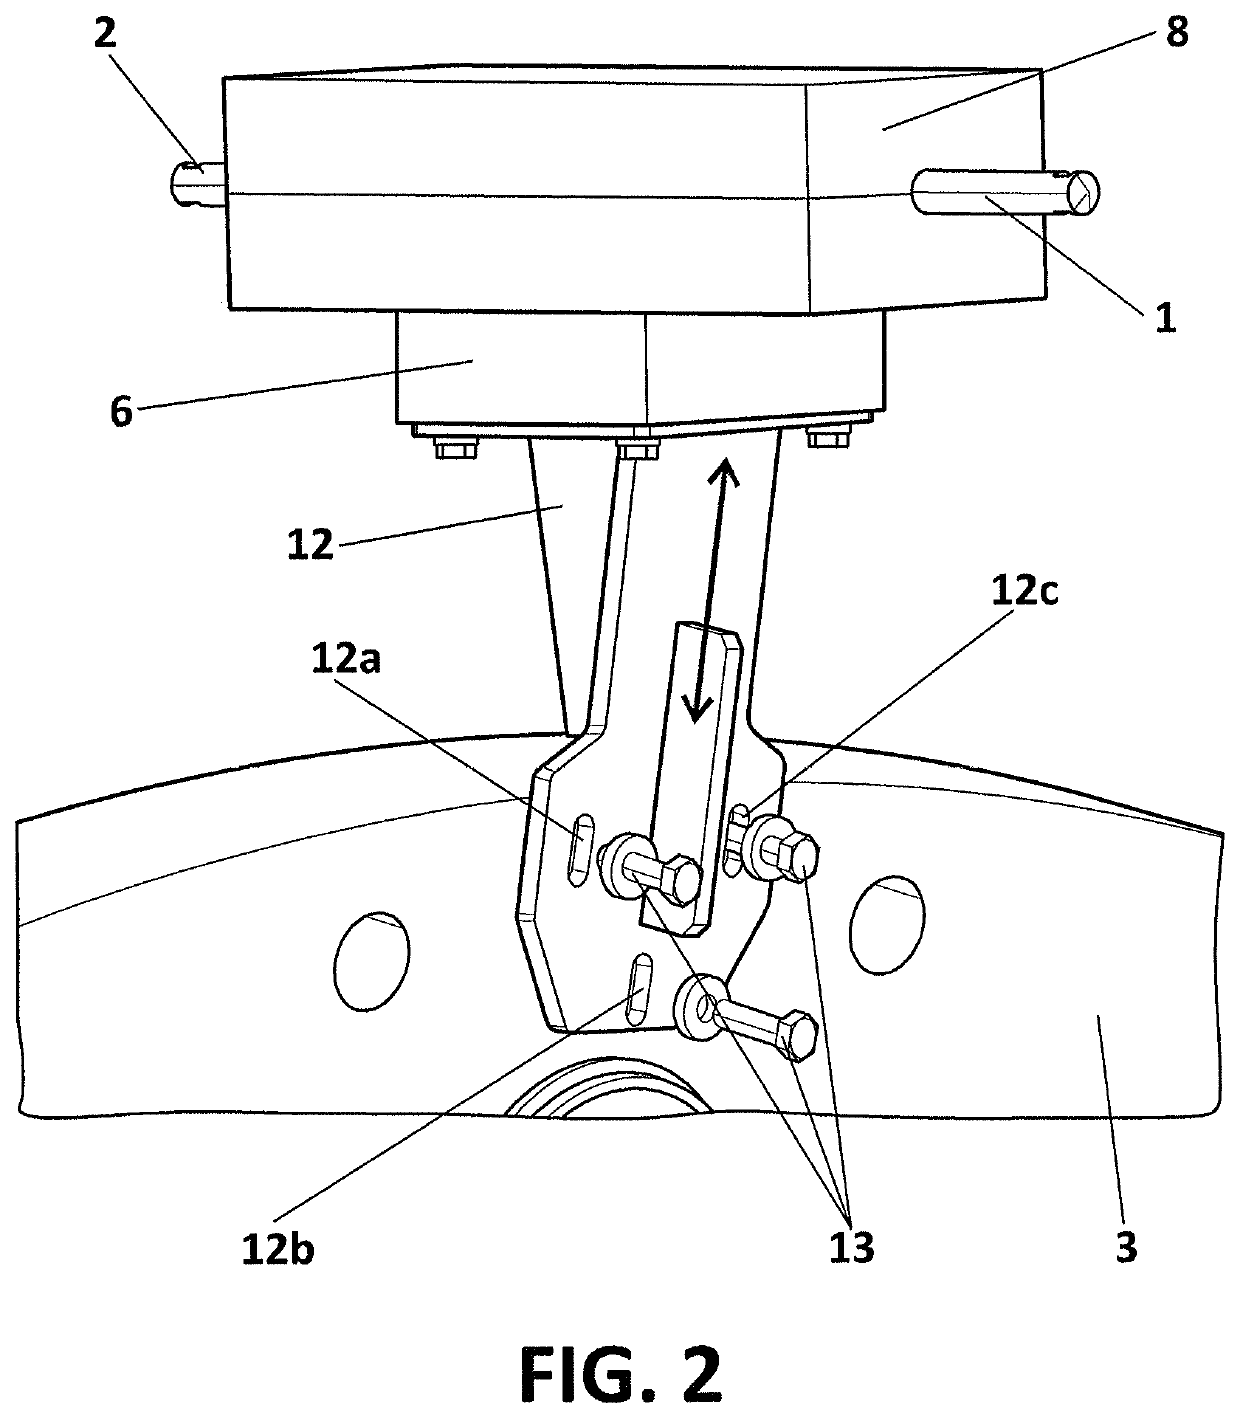 Lightning transmission device between the rotor and the nacelle in a wind turbine